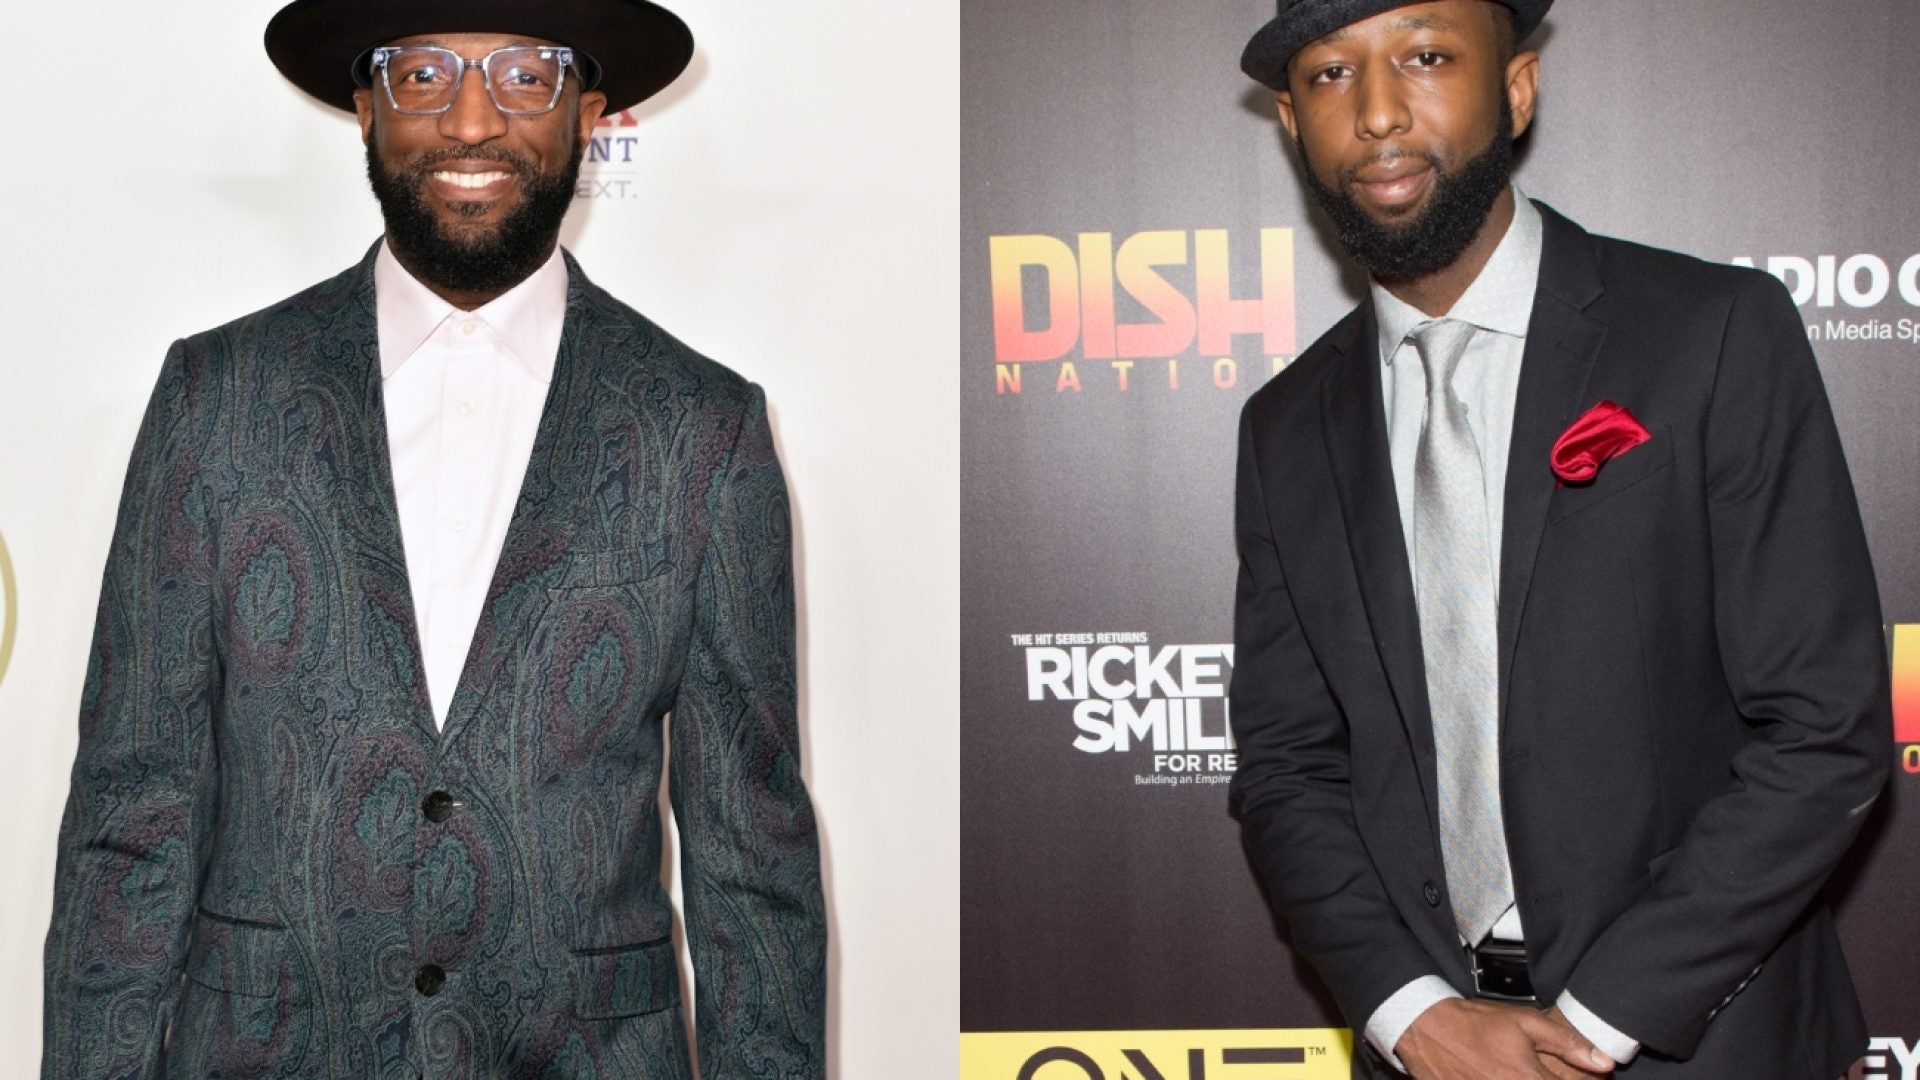 Rickey Smiley Announces That His Son Has Died: ‘Pray For Our Family’